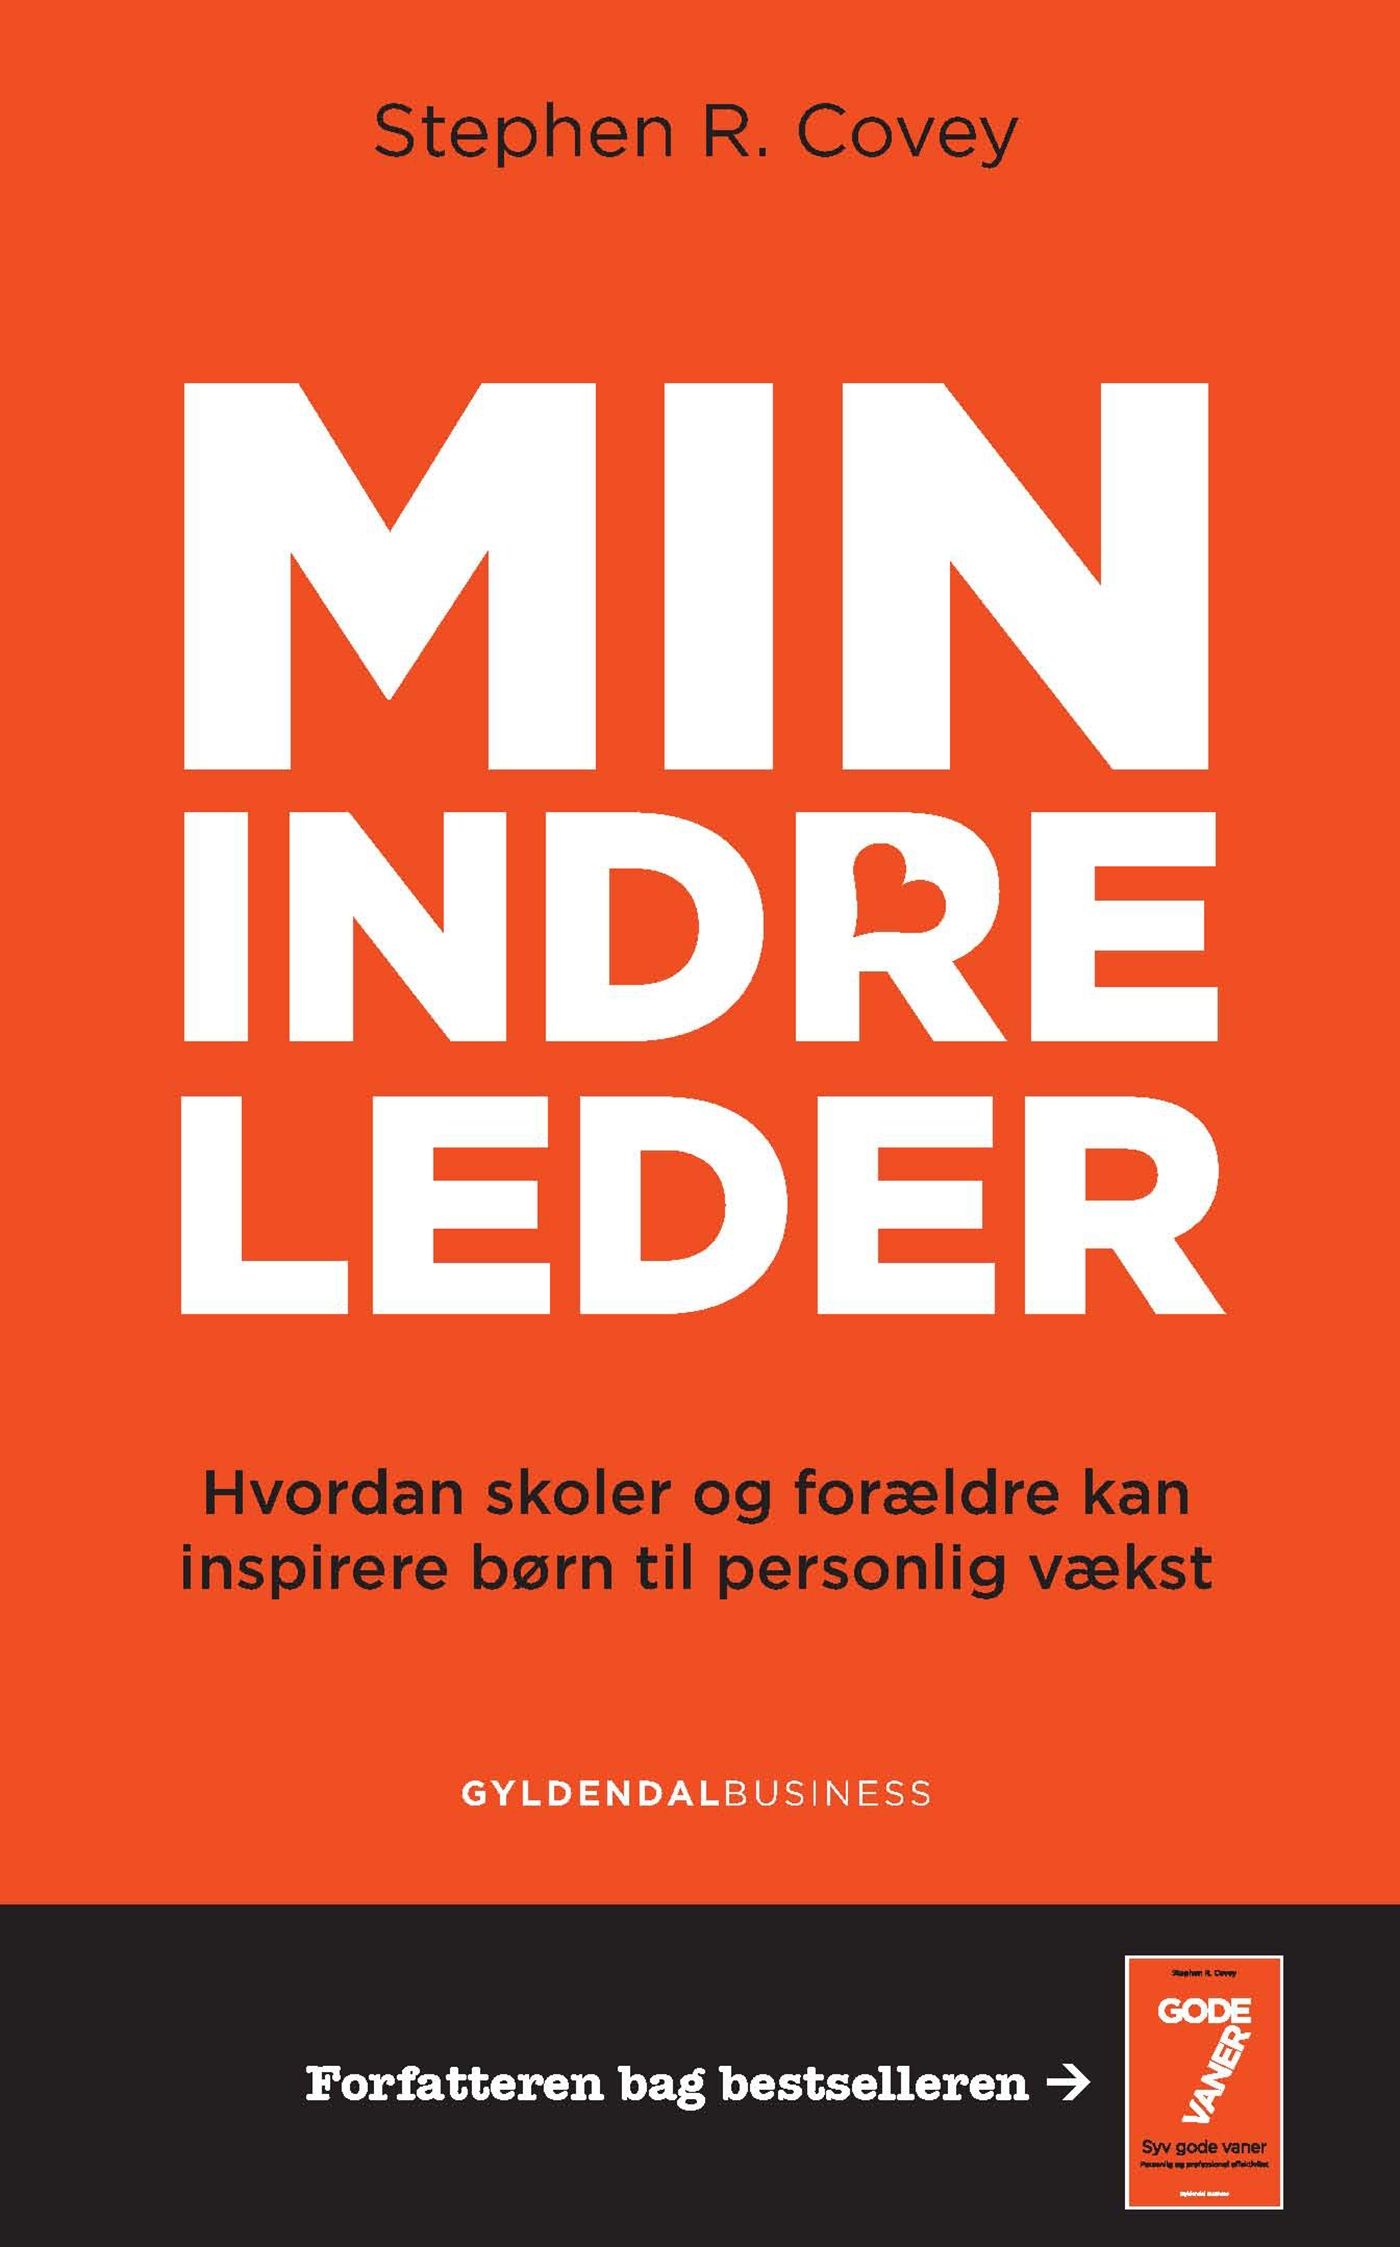 Min indre leder, eBook by Stephen R. Covey